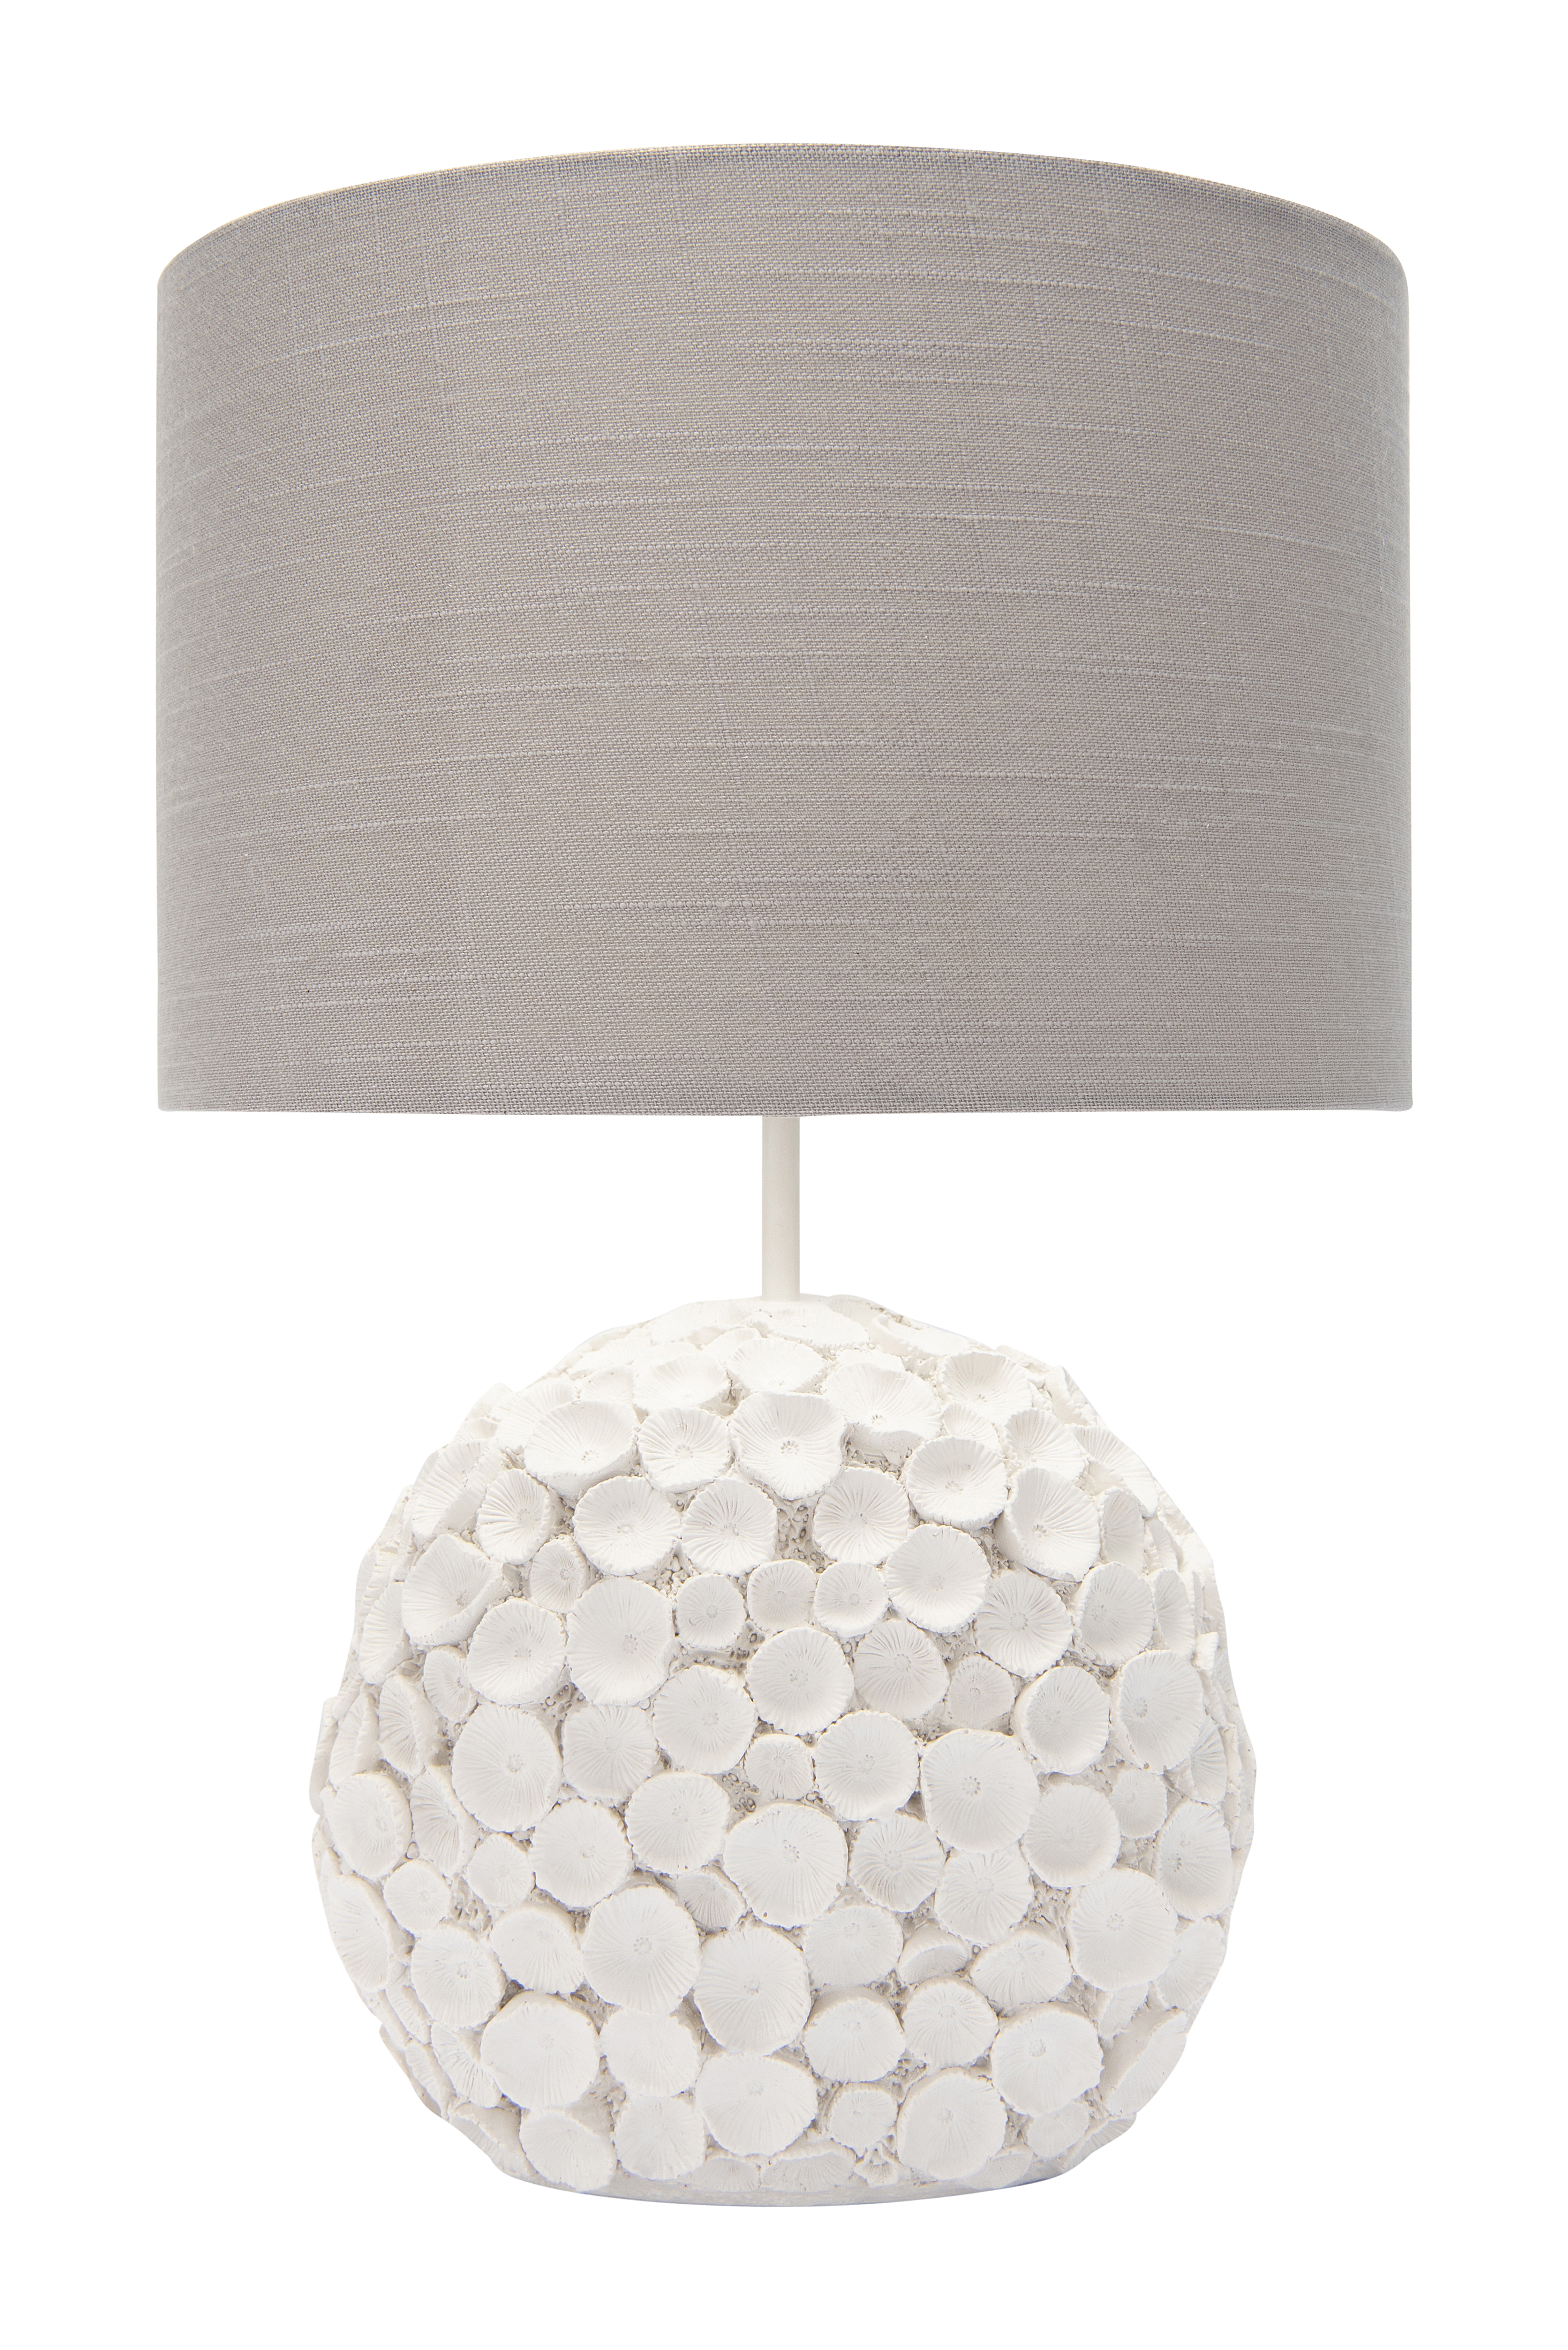 Resin Table Lamp with Linen Shade & Distressed Finish - Image 0